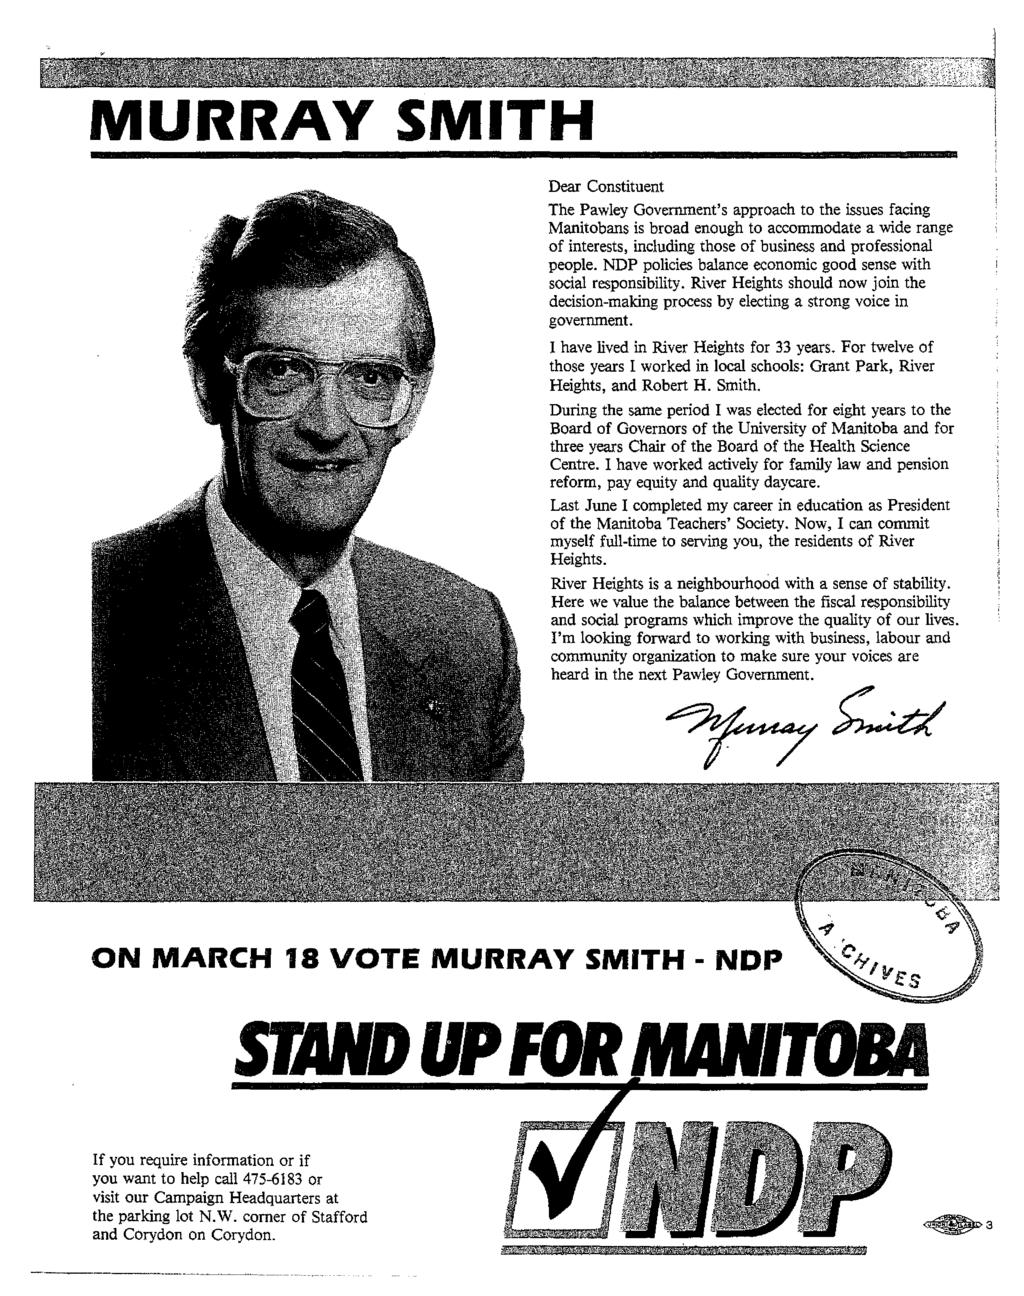 MURRAY SMITH Dear Constituent The Pawley Government's approach to the issues facing Manitobans is broad enough to accommodate a wide range of interests, including those of business and professional